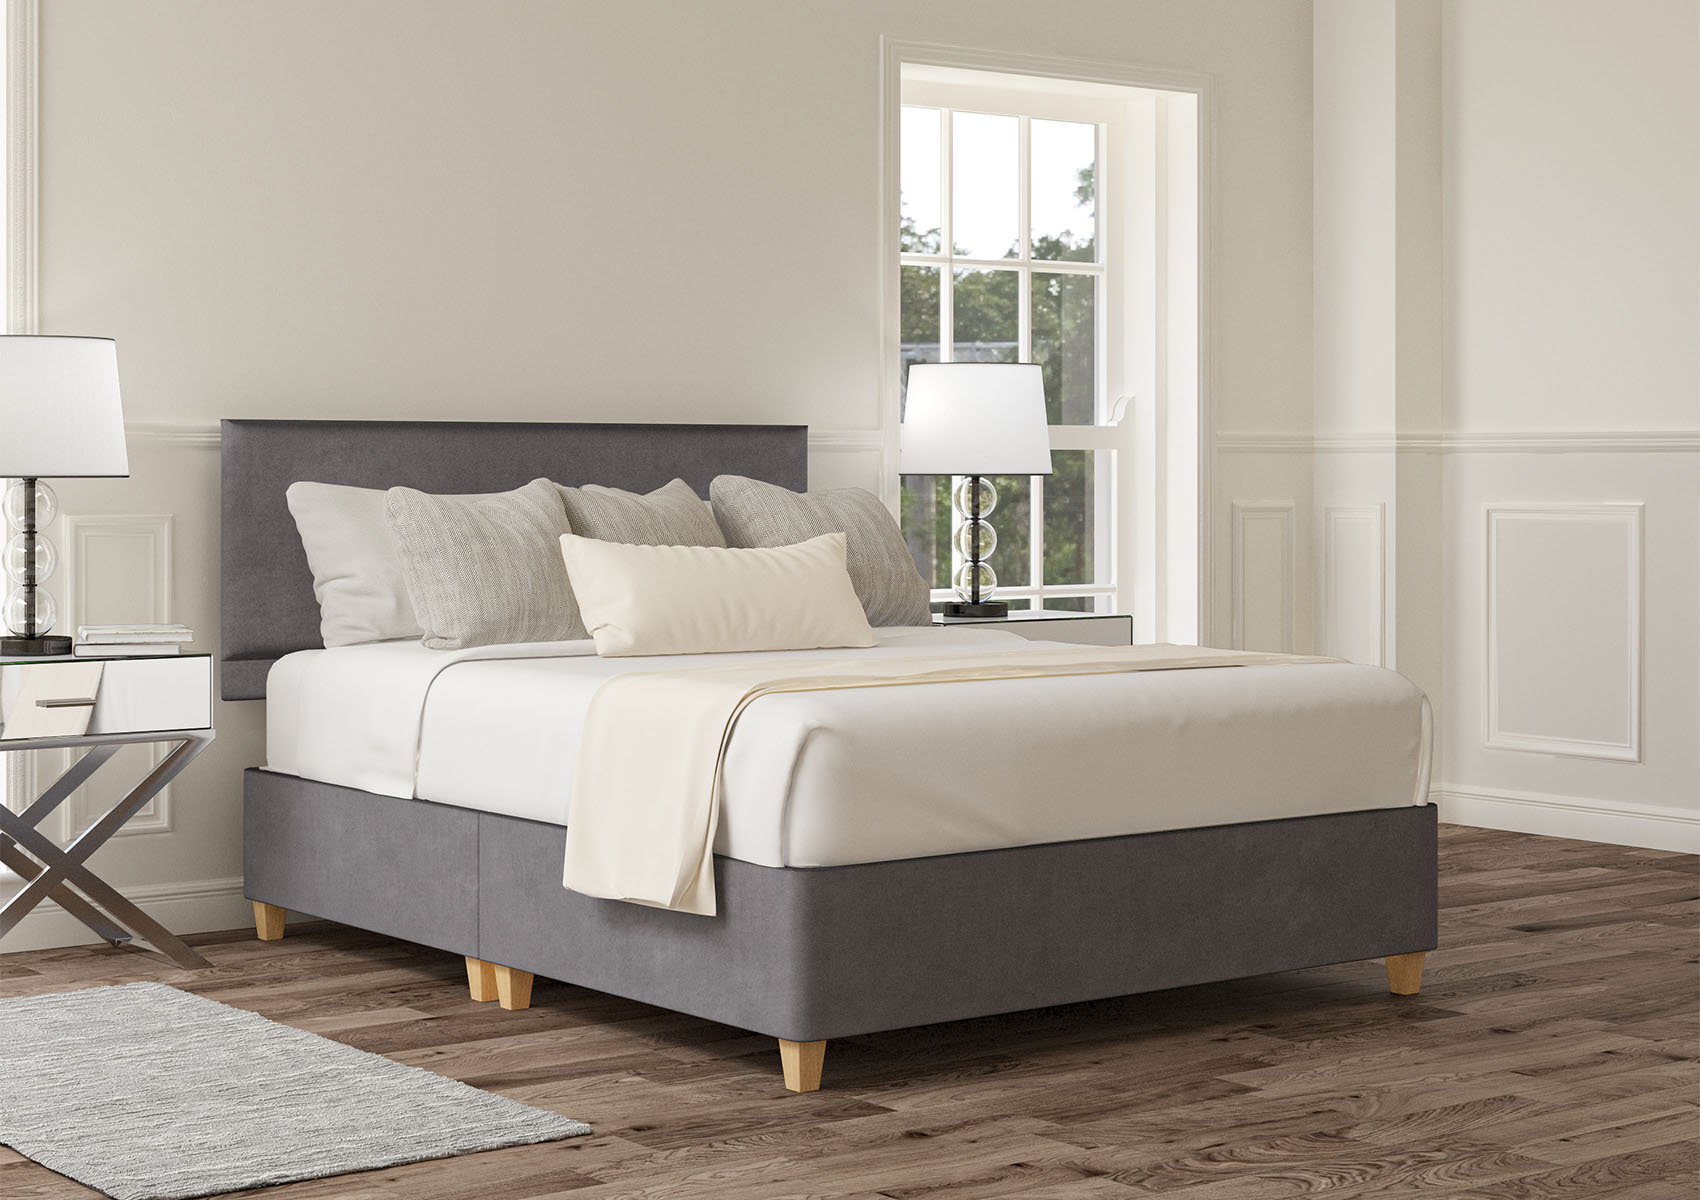 View Henley Verona Silver Upholstered Single Bed Time4Sleep information